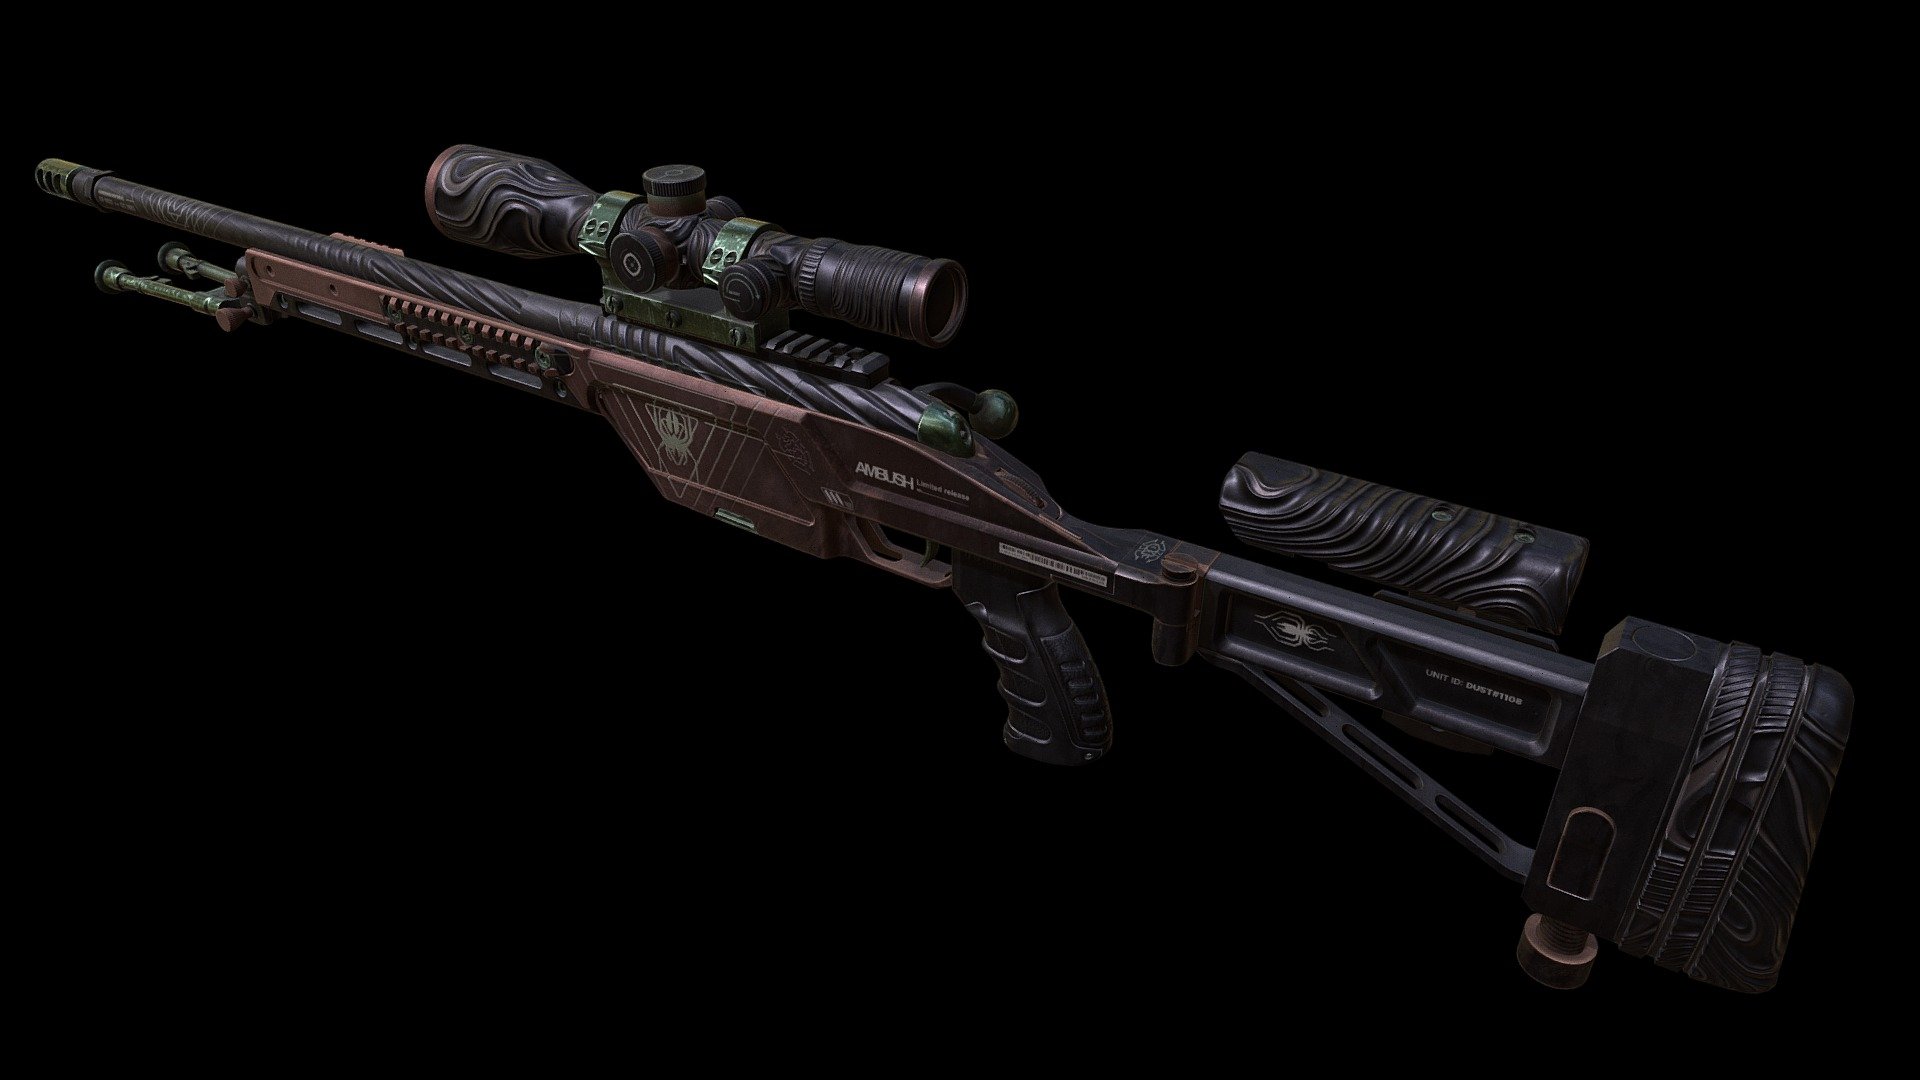 Concept texture/skin for Counter Strike 2
If you want to see my work ingame, vote for my workshop submissions here: https://steamcommunity.com/id/tanapta/myworkshopfiles/



This work includes complete texture/material set on a predefined ingame model.

My focus was and always will be to create medium-tier weapon skins, that are relatively neutral and not overly complicated. I know there are so many superb artists that create a true pieces of Art - I’m just a humble ui/ux designer that puts his soul to create a niche of guns that fit my needs.

Like all of my work, I will adapt this style to various guns with changes and adjustments where it seems necessary (for example additional material because of model complexity etc).

Much love,
Tanapta - SSG08 - Ambush (CS2) - 3D model by tanapta 3d model